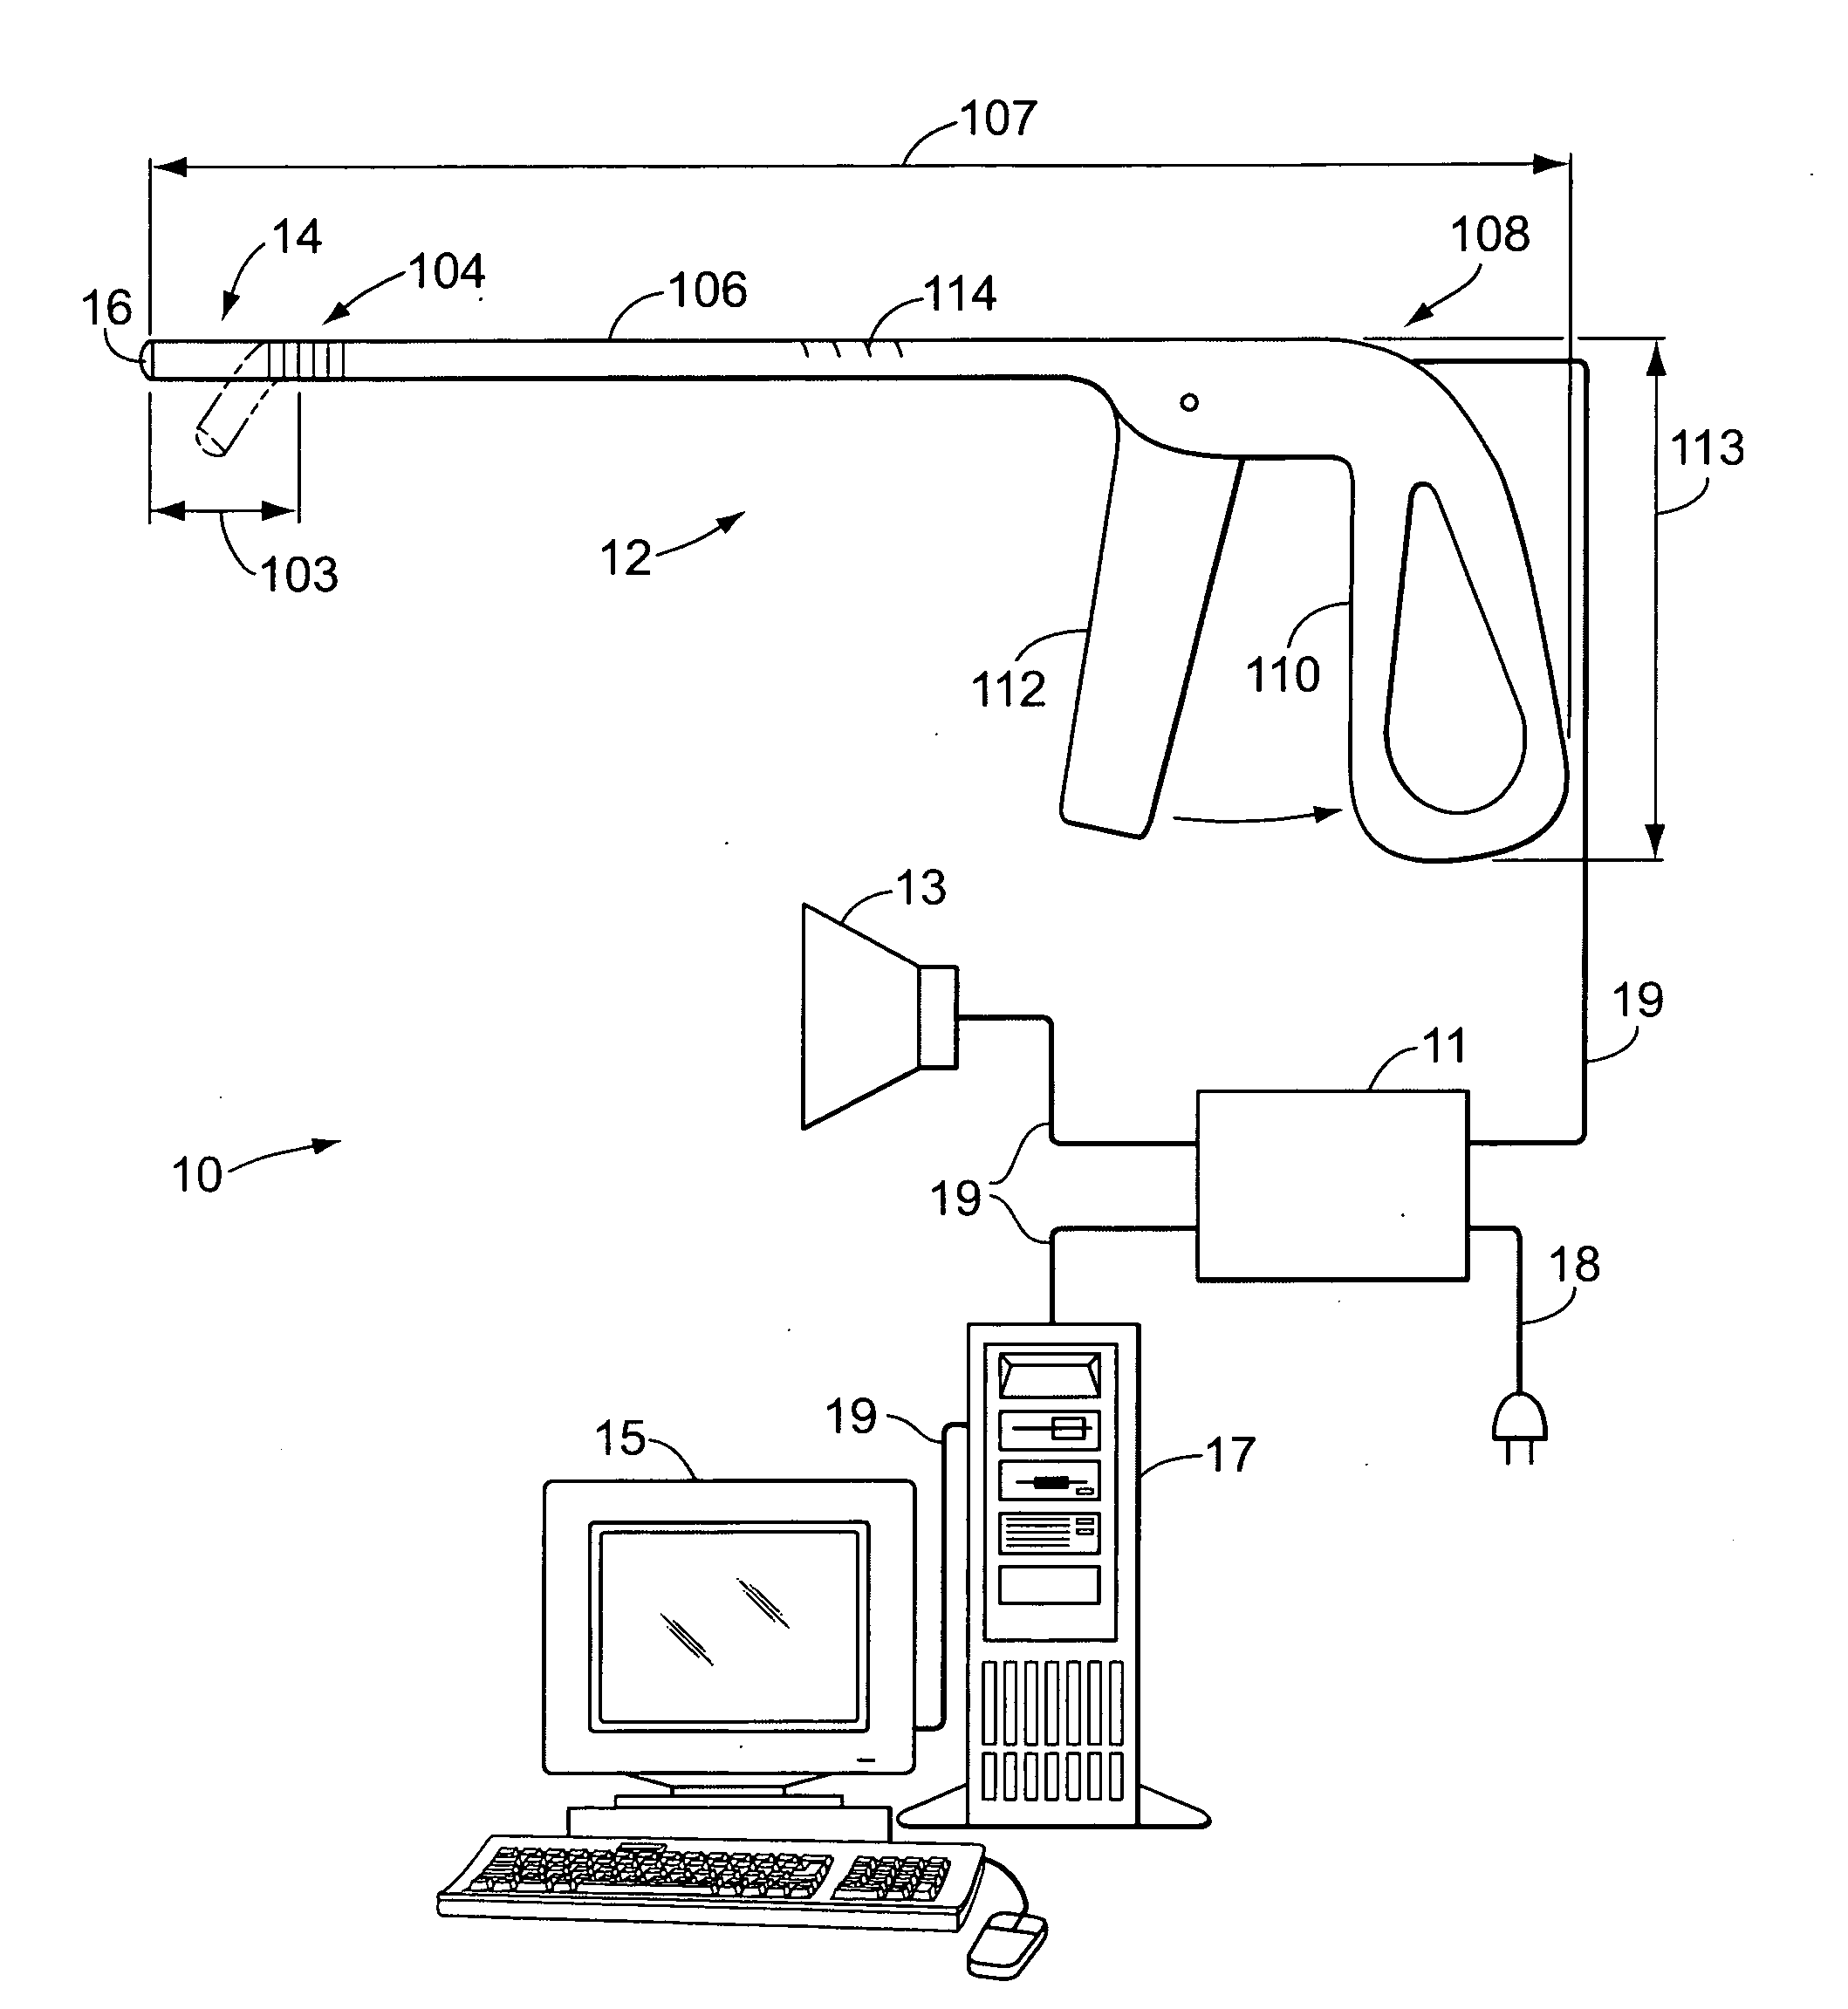 Method and apparatus for monitoring blood flow to the hip joint